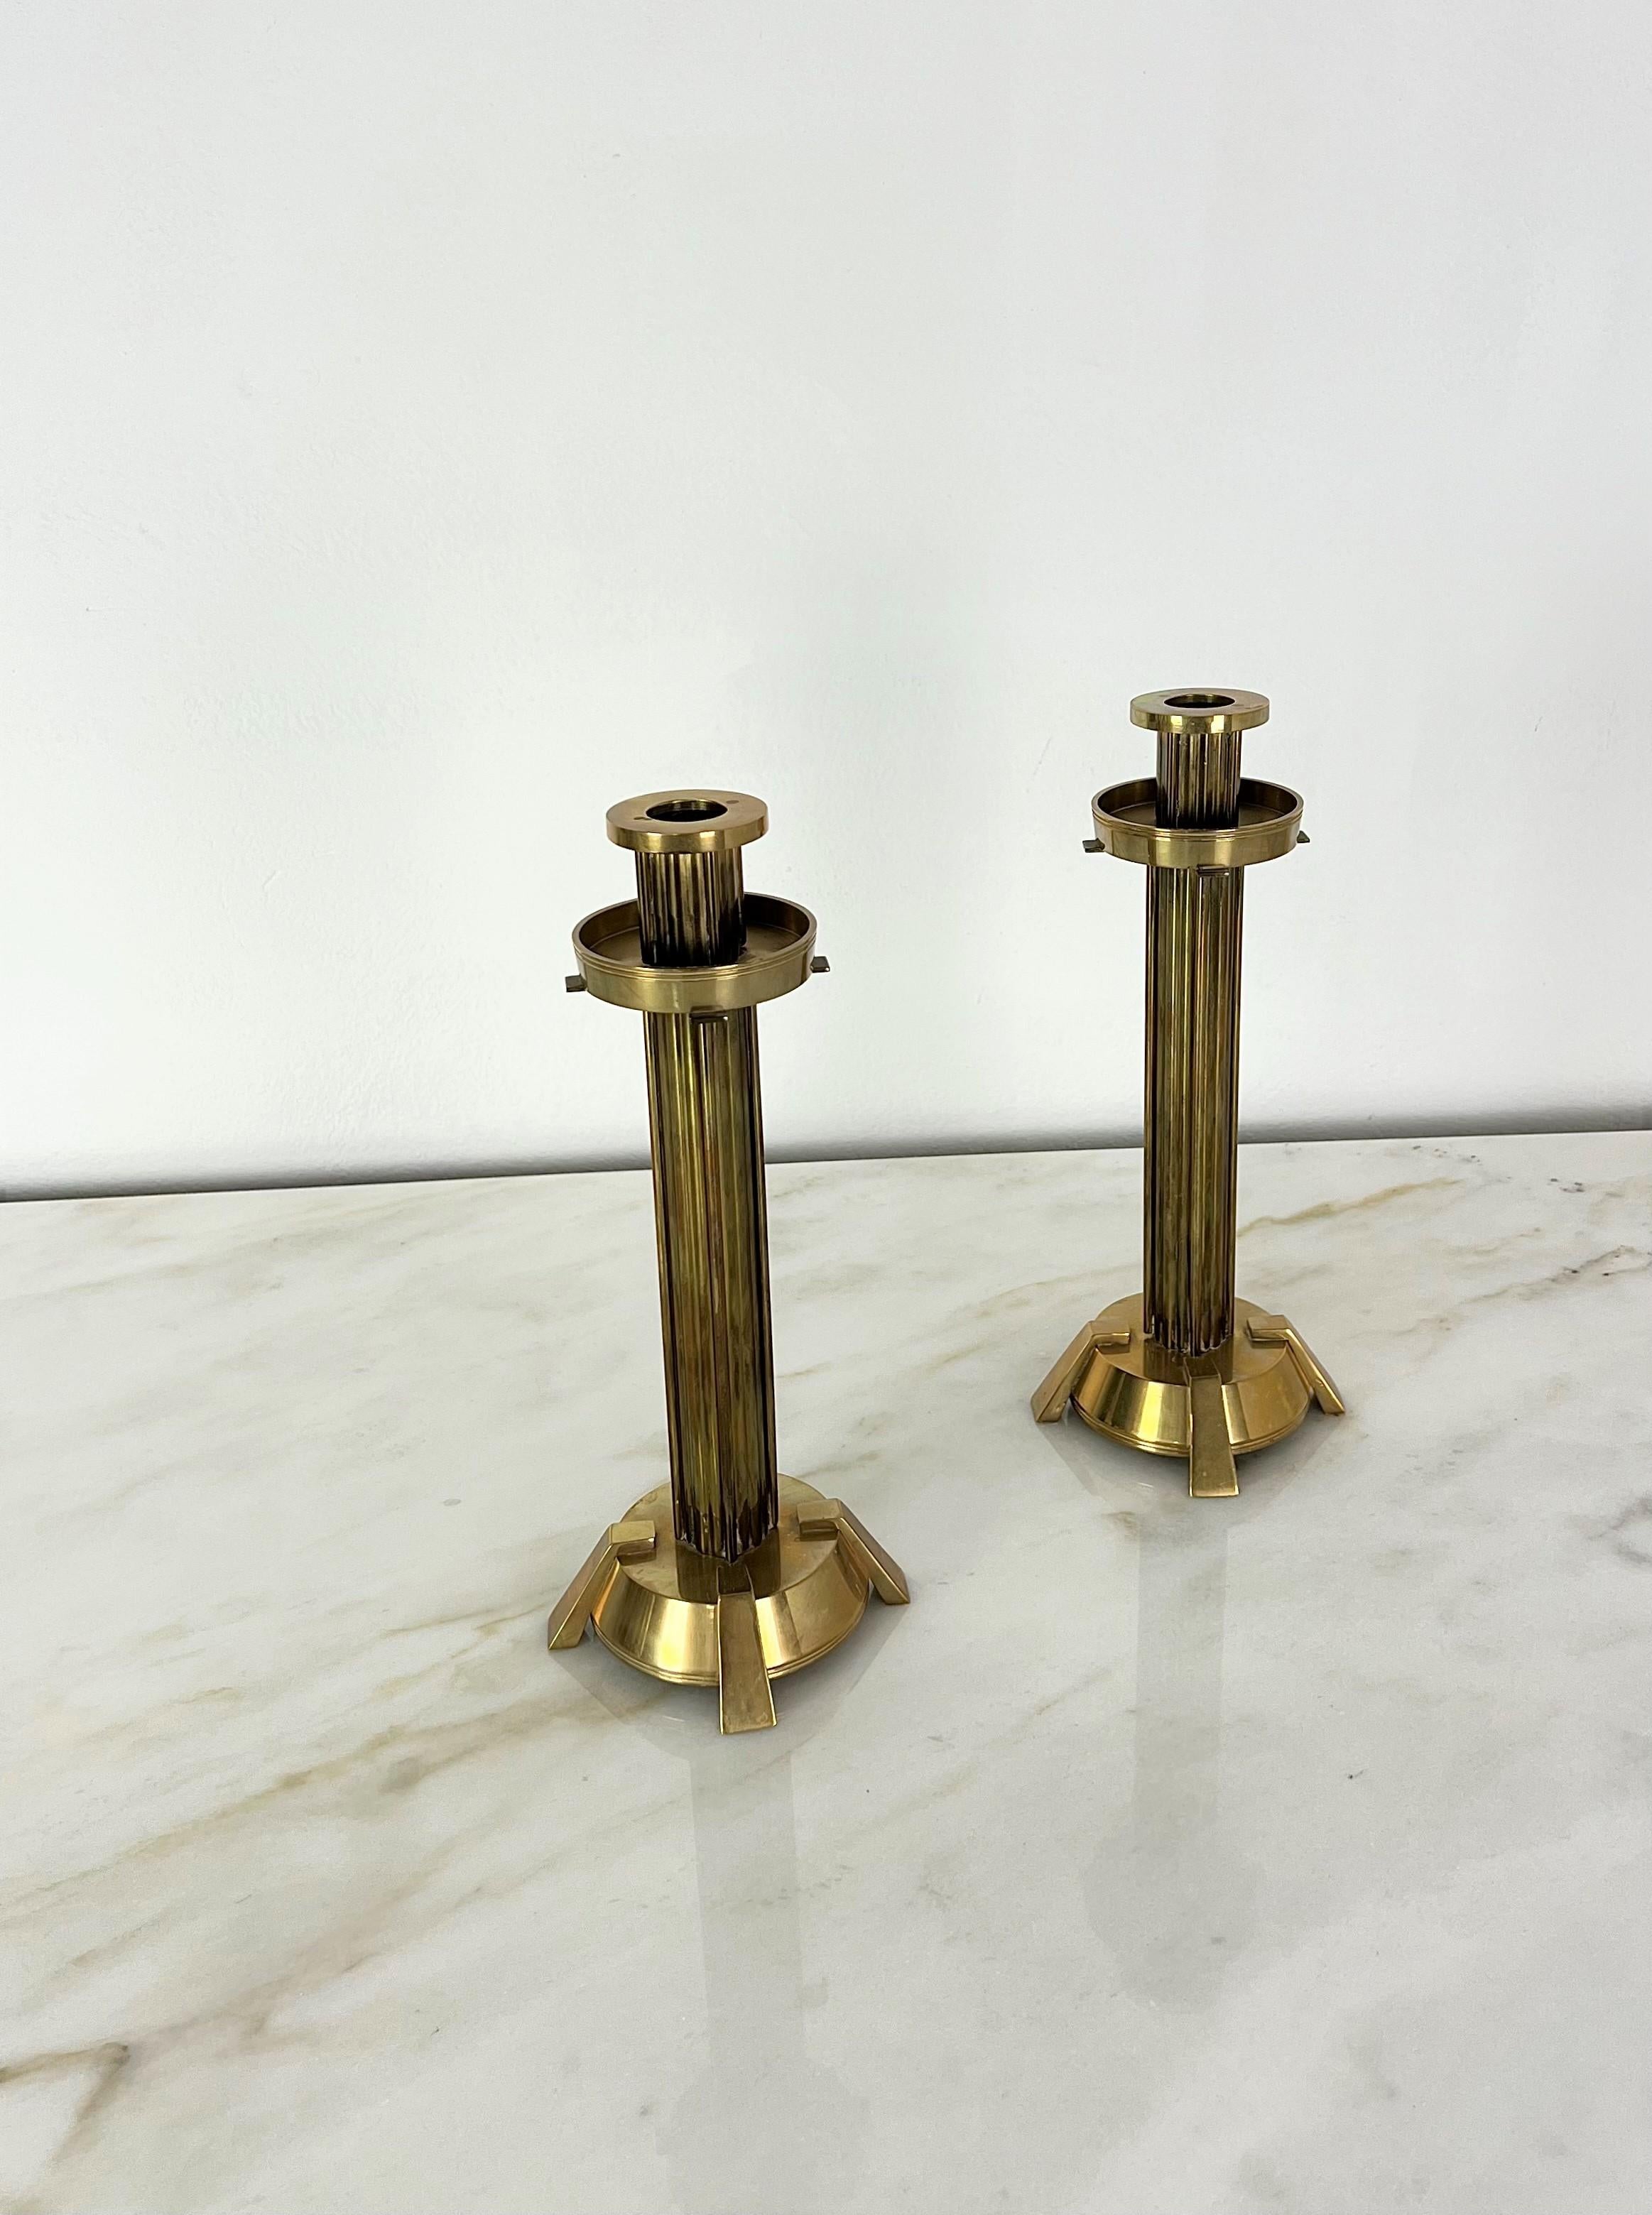 Late 20th Century Decorative Object Brass Candelabras Candle Holders Midcentury Italy 70s Set of 4 For Sale